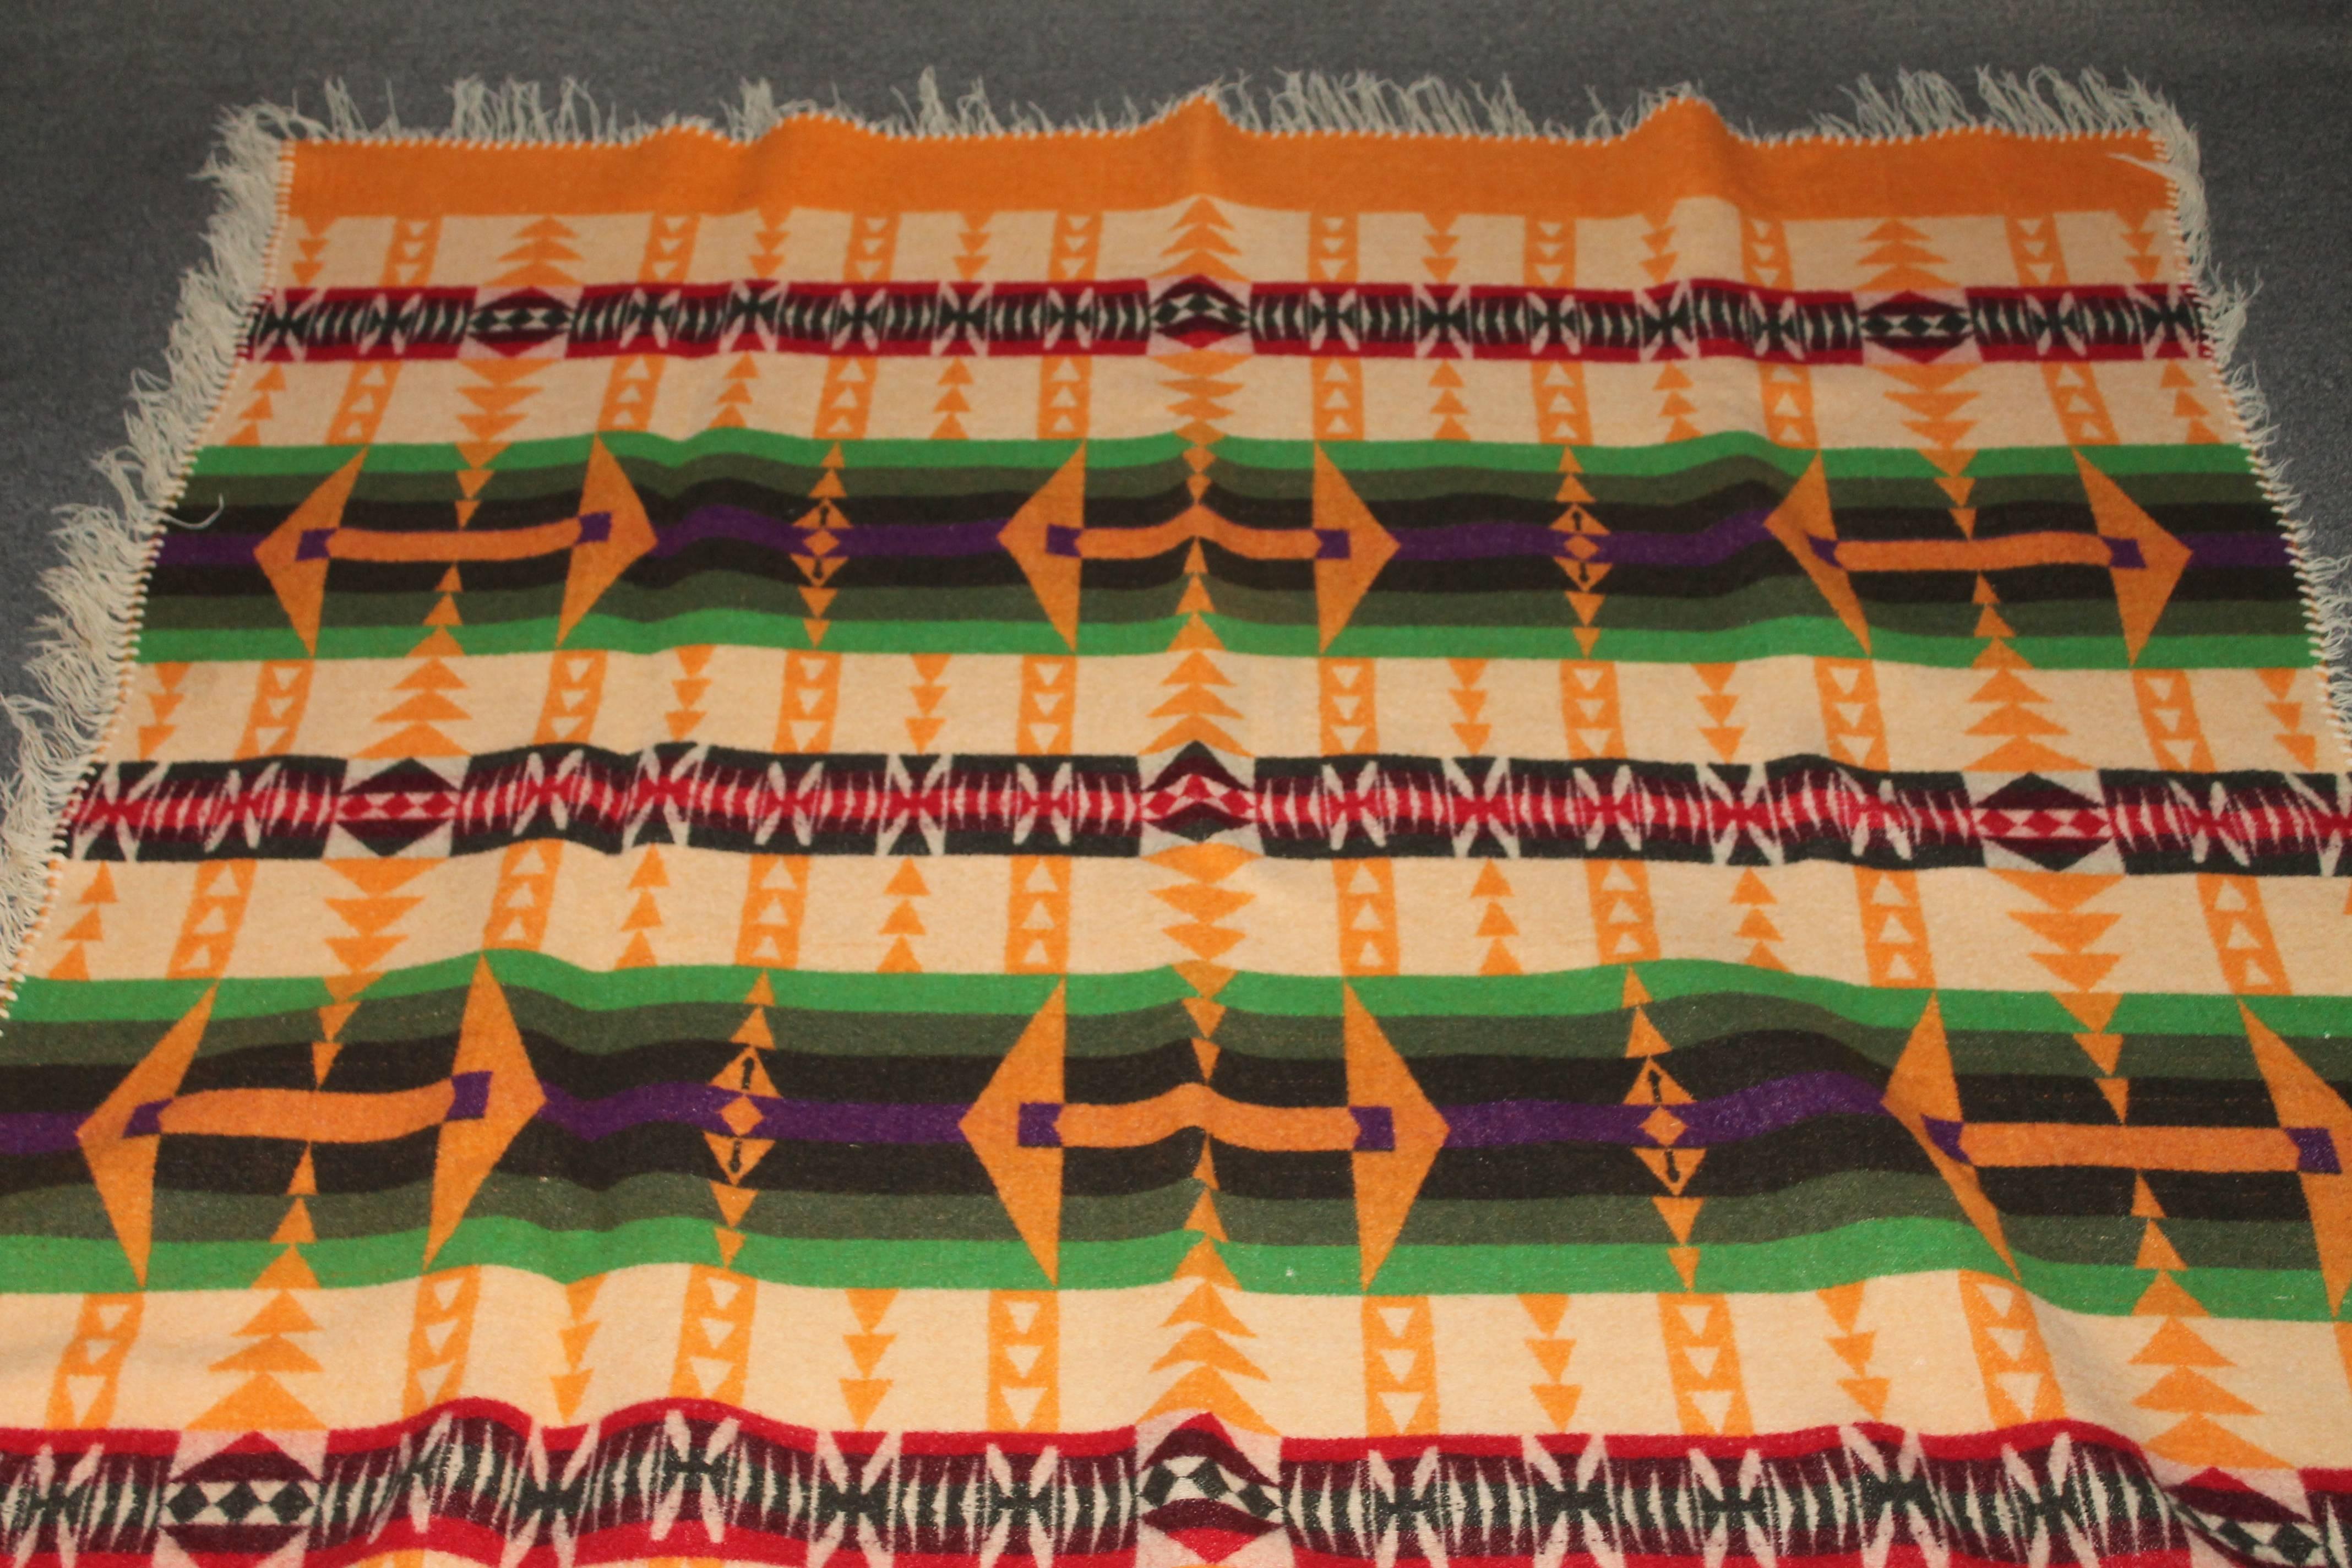 This fine camp blanket has amazing and most unusual colors in pristine condition. This cheddar back round color is very special and retains its original Cayuse label and dated 1909 on the black label.